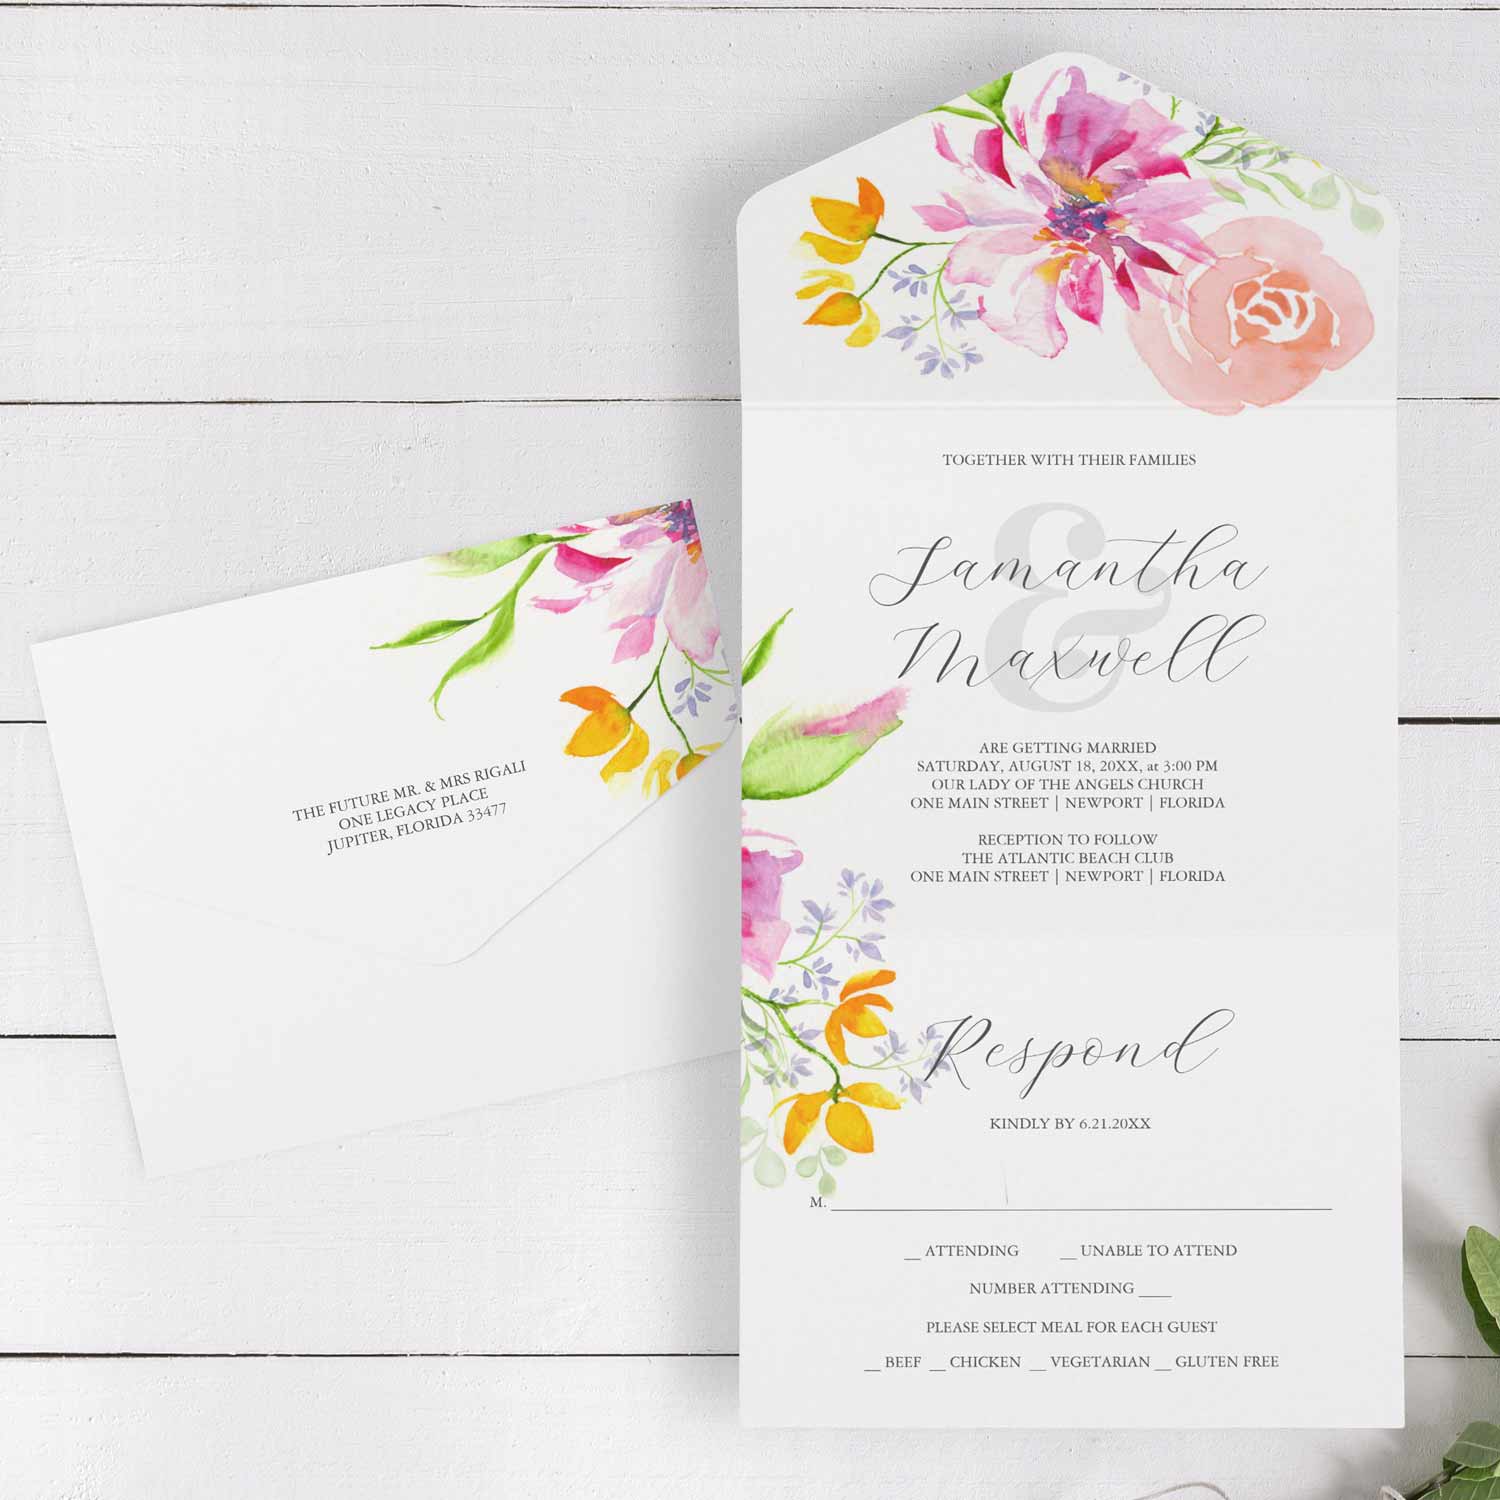 Wedding Invitation With RSVP Card features unique watercolor florals in shades of peach, pink and orange. Original watercolor art by Victoria Grigaliunas of Do Tell A Belle